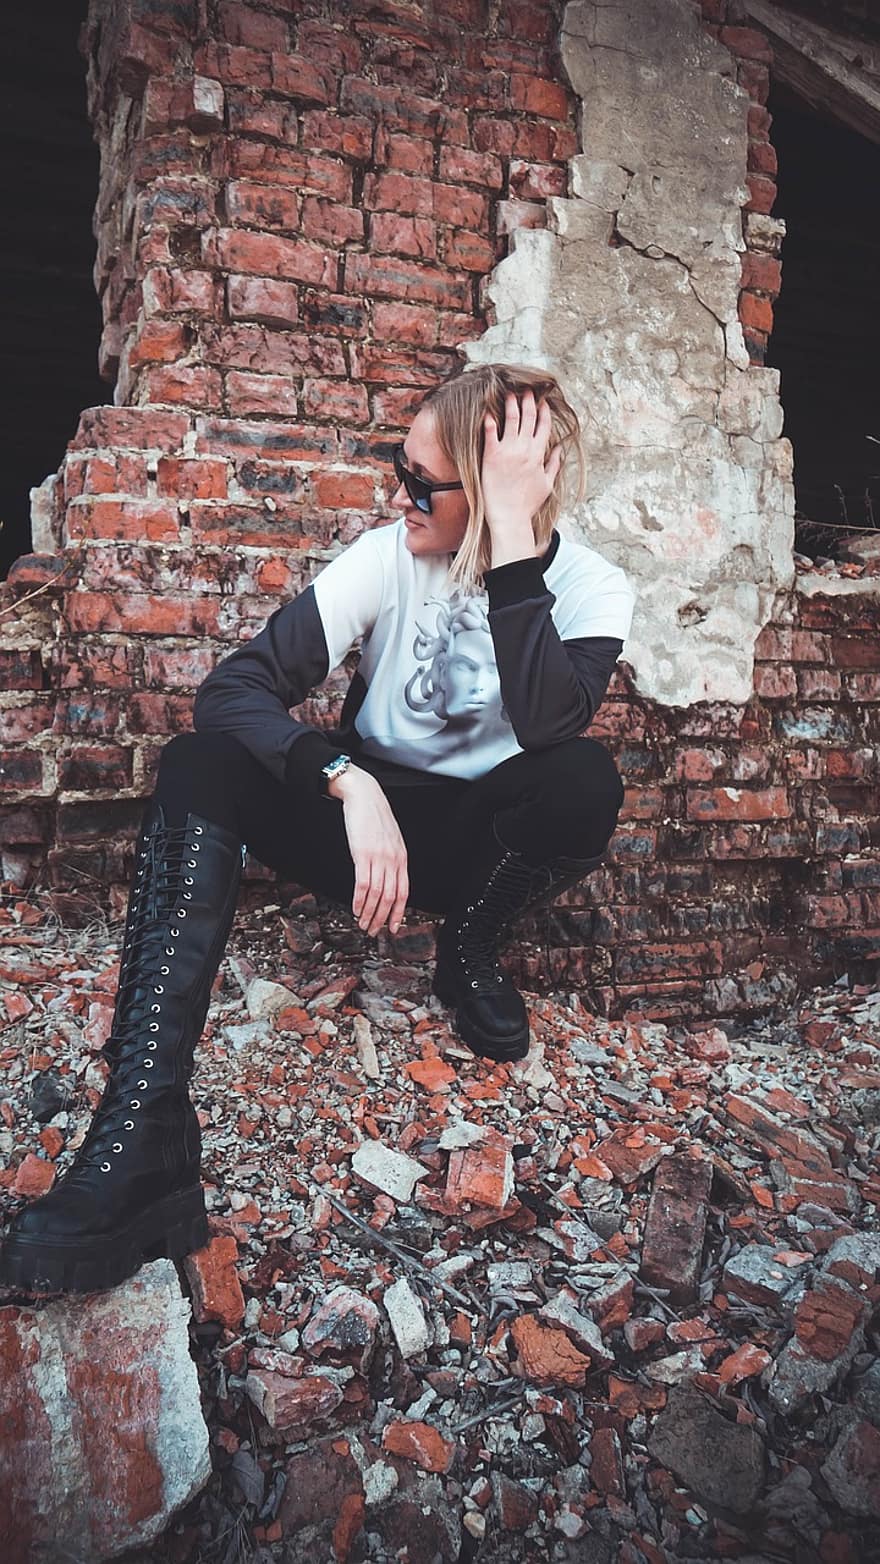 Girl, Fashion, Brick, Woman, Blonde, Glasses, Brickwall, Boots, Shoes, Style, one person